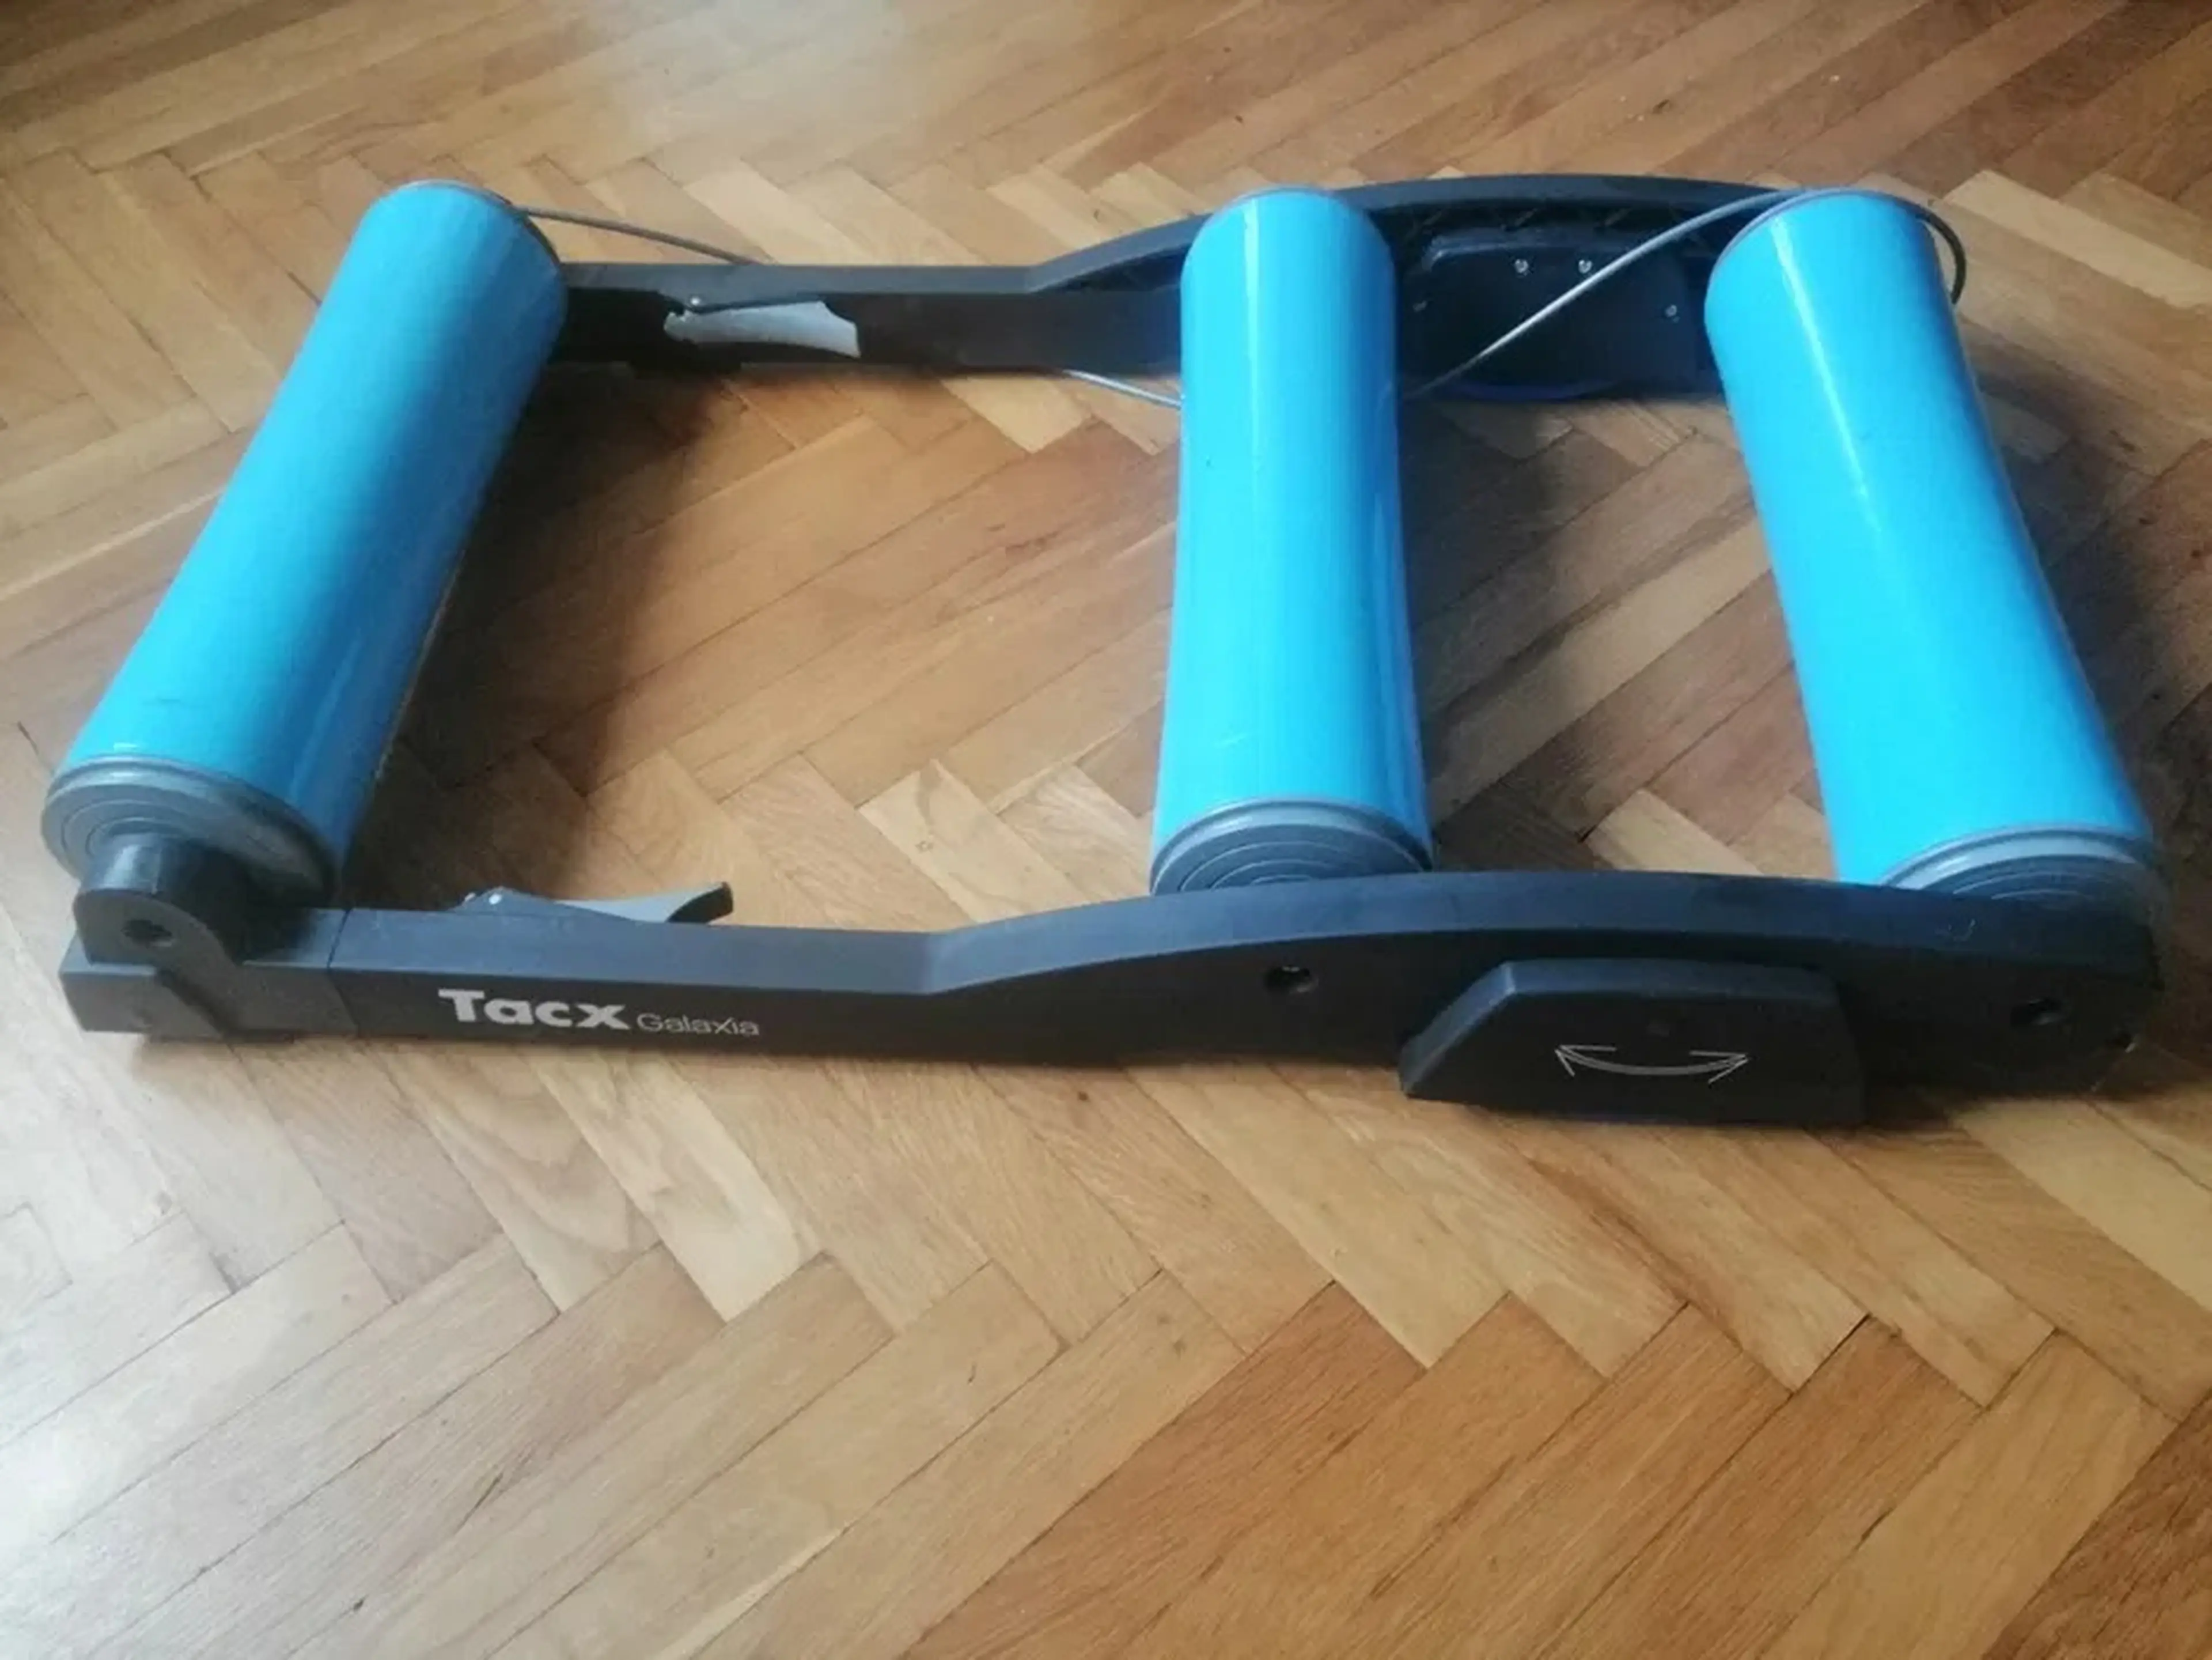 3. Roller Tacx Galaxia